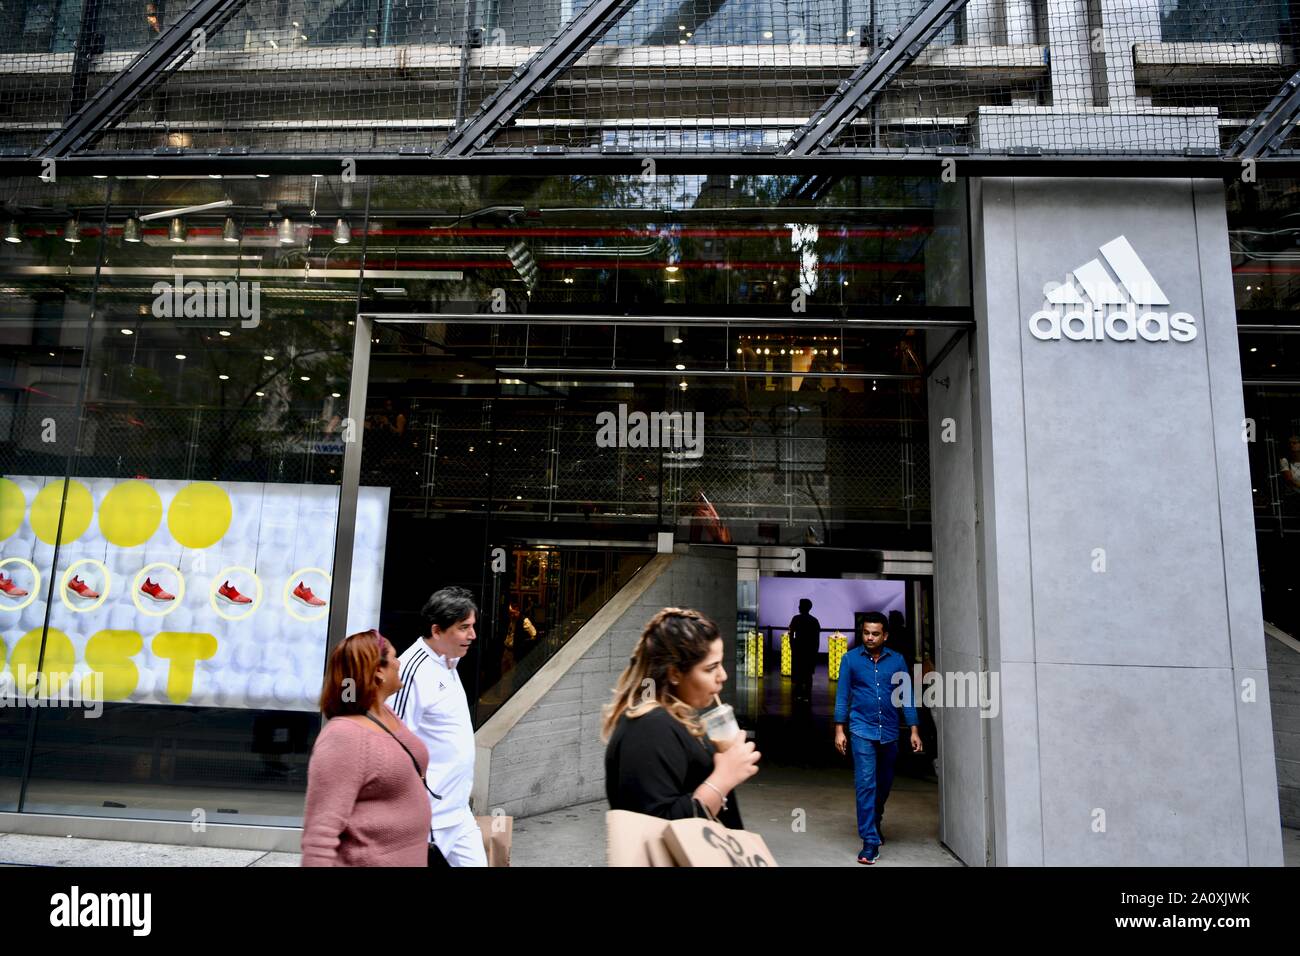 Adidas Flagship Store New York City High Resolution Stock Photography and  Images - Alamy